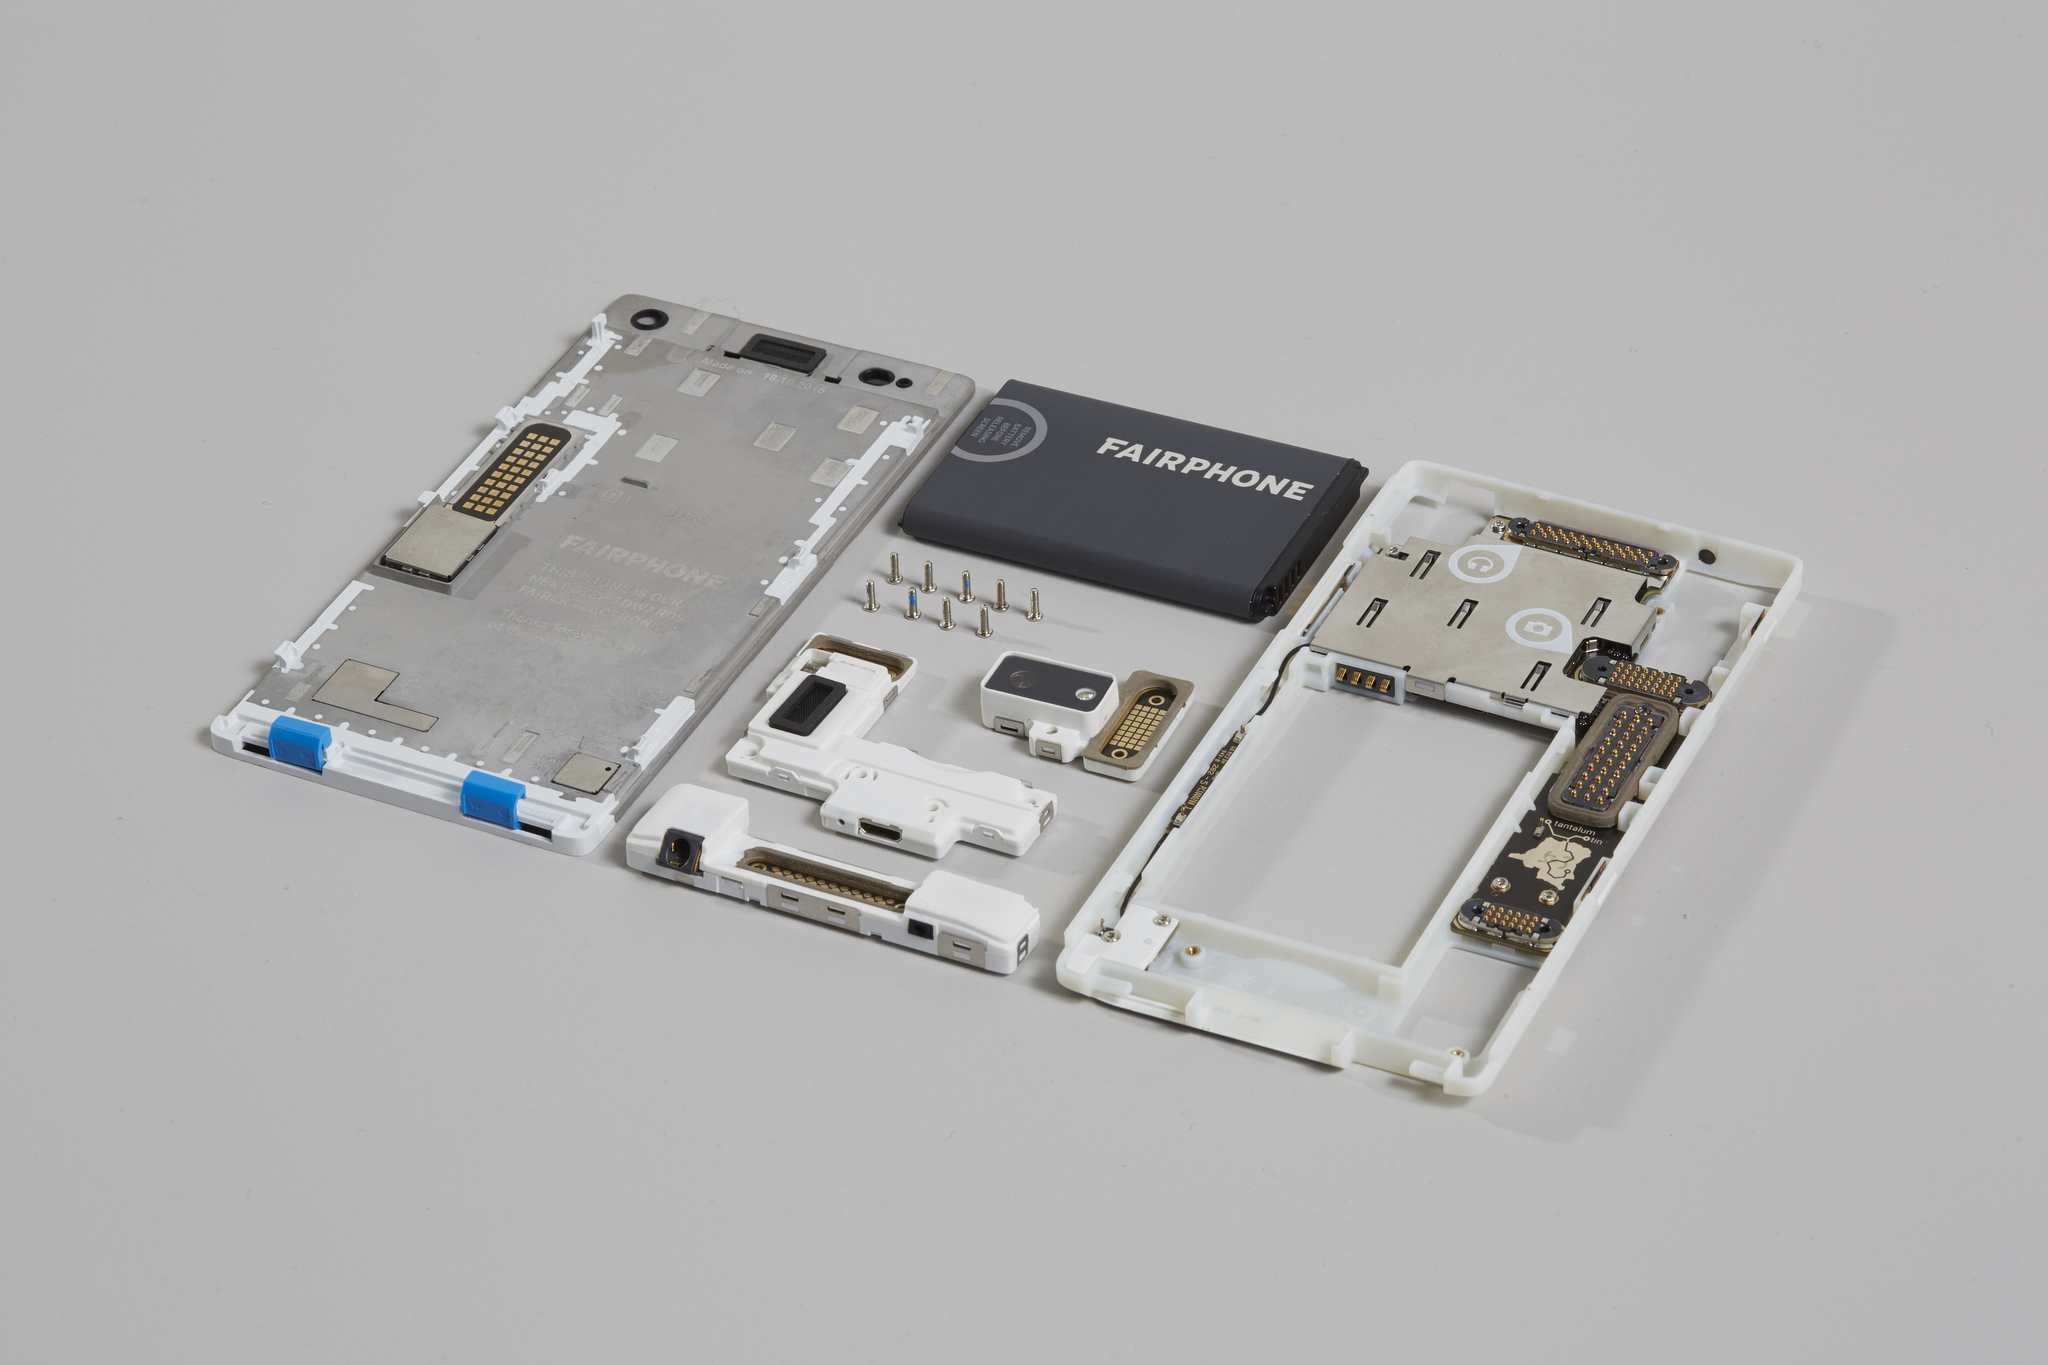 Fairphone startup equitable